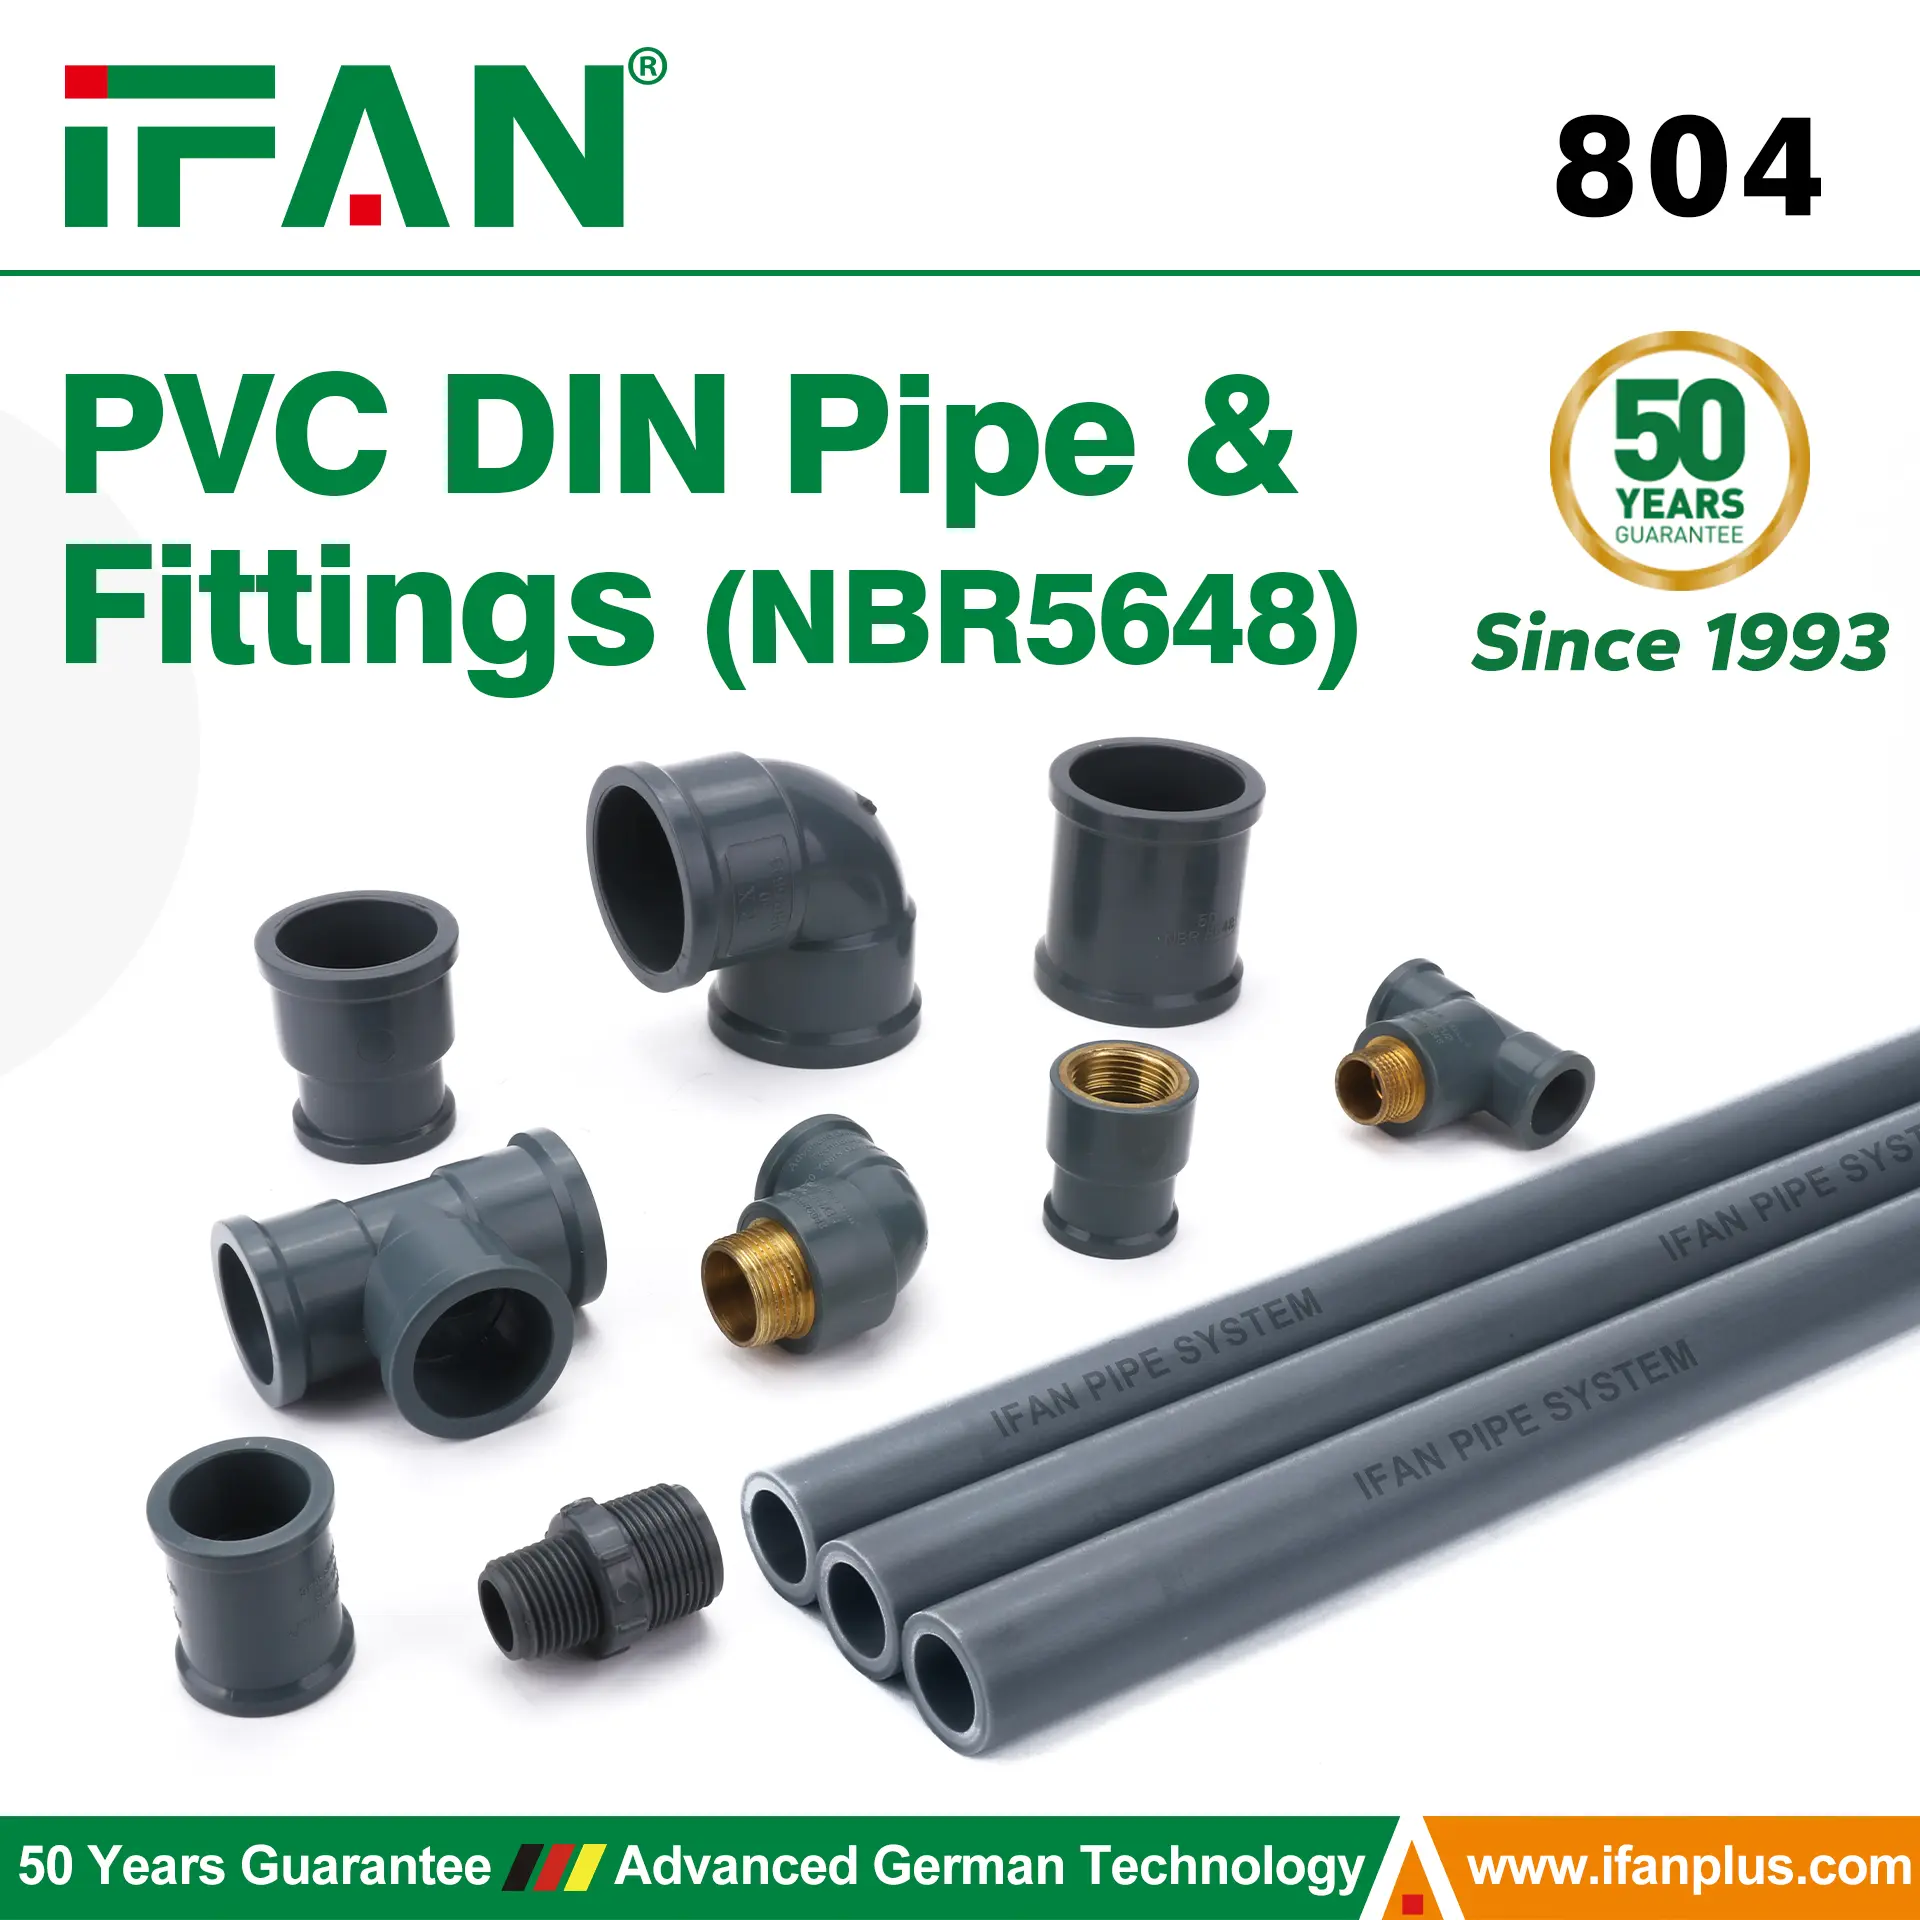 PVC DIN Pipe And Fittings NBR5648